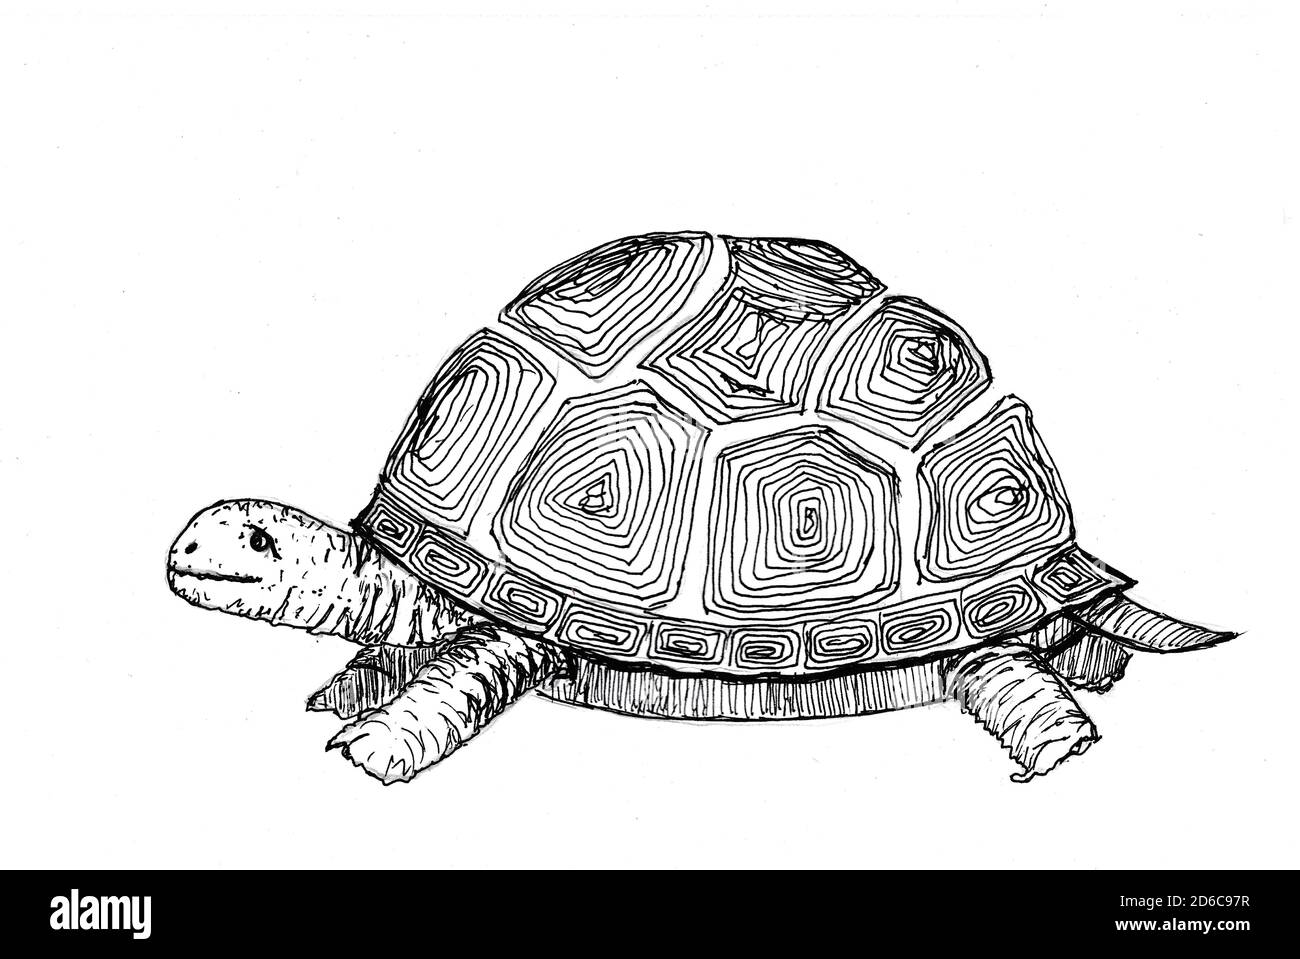 Turtle sketch for coloring book drawn with black pen. Freehand drawing illustration. Land animal. Hand drawn isolated on white background. Copy space. Stock Photo